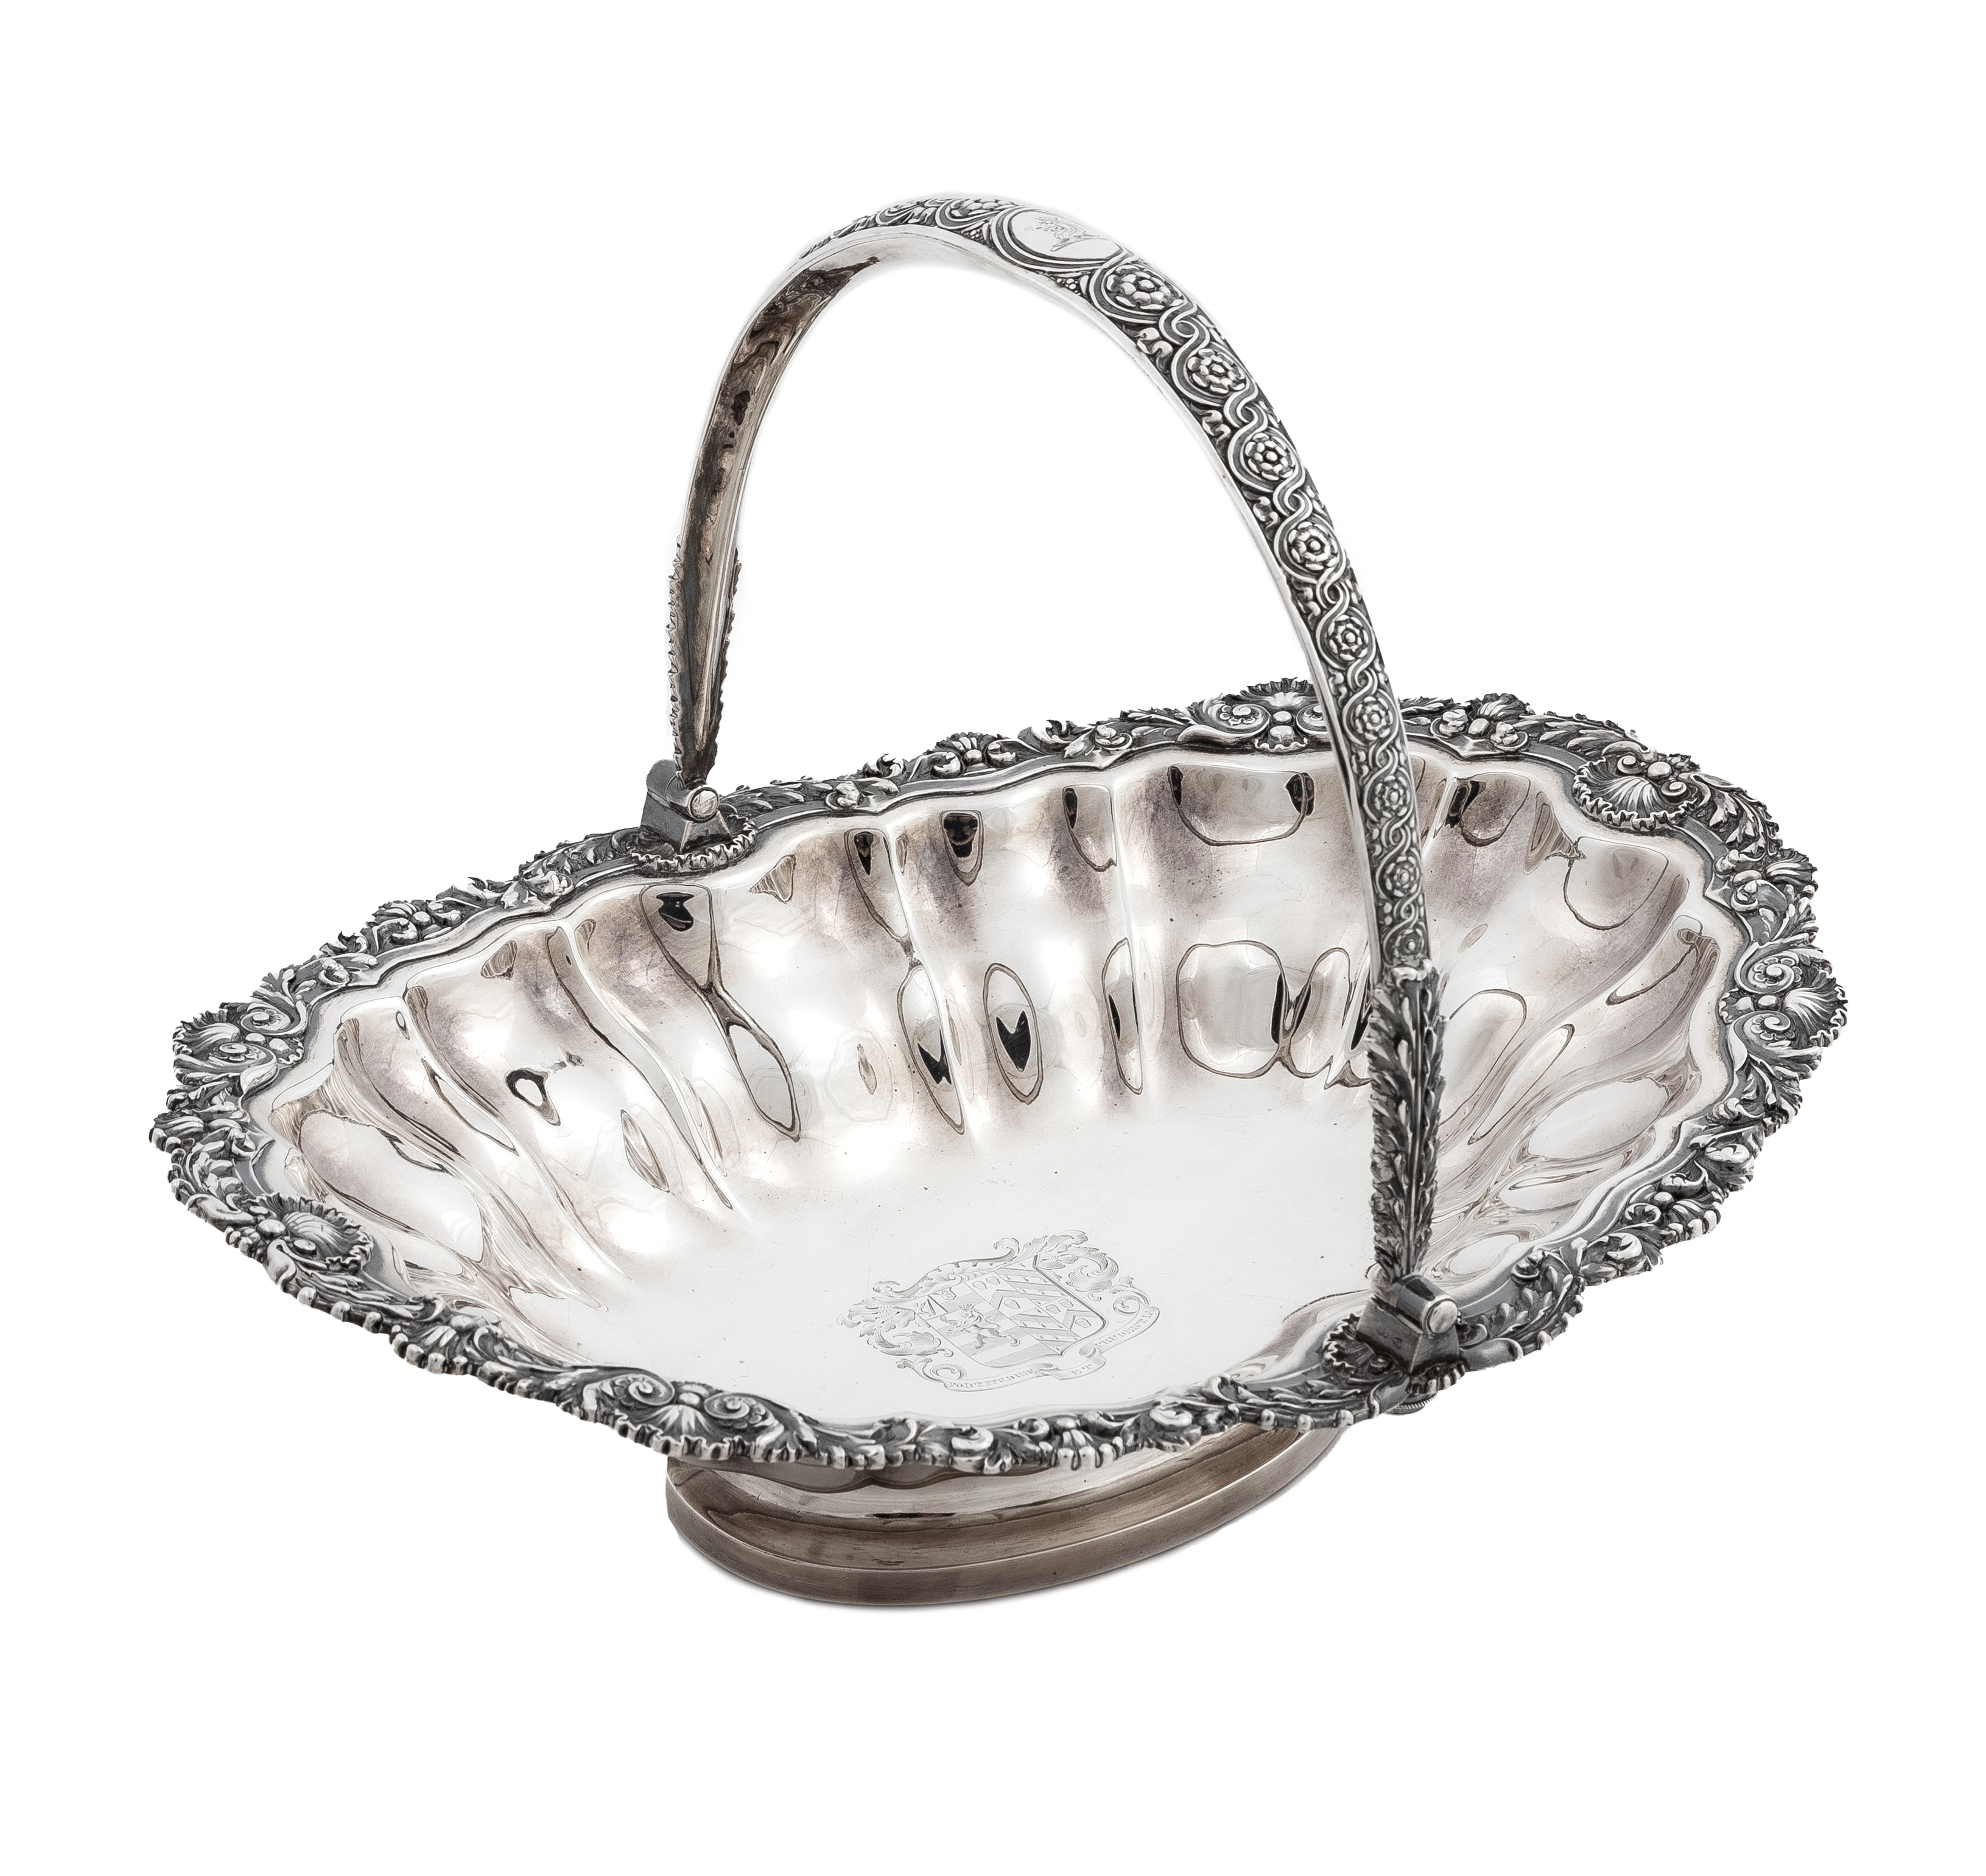 PAUL STORR SILVER CAKE BASKET With